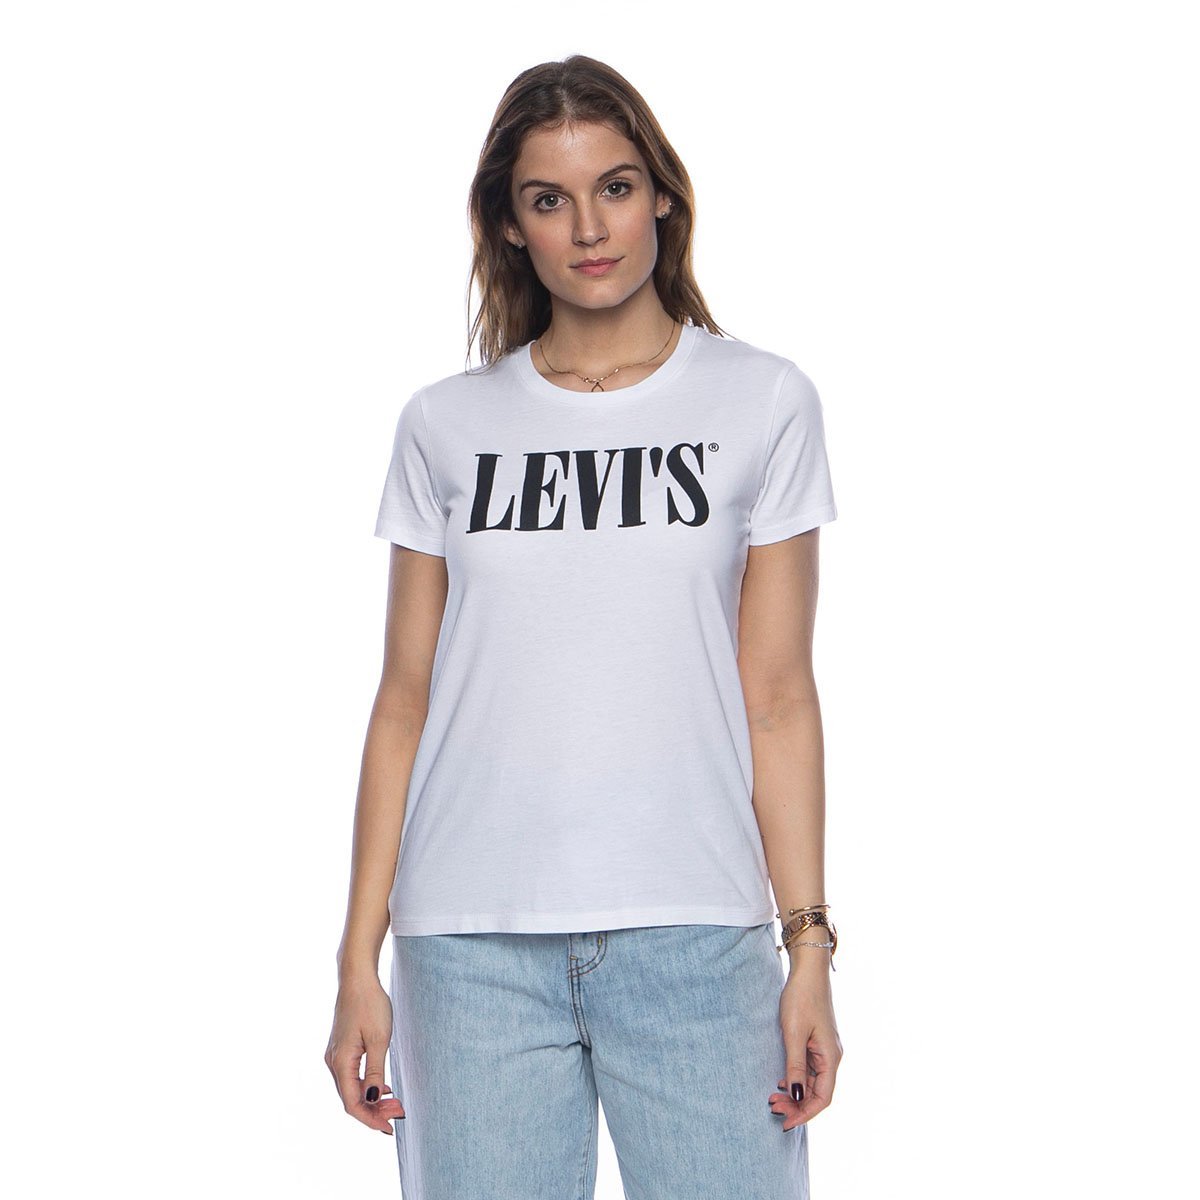 levis t shirt black and white